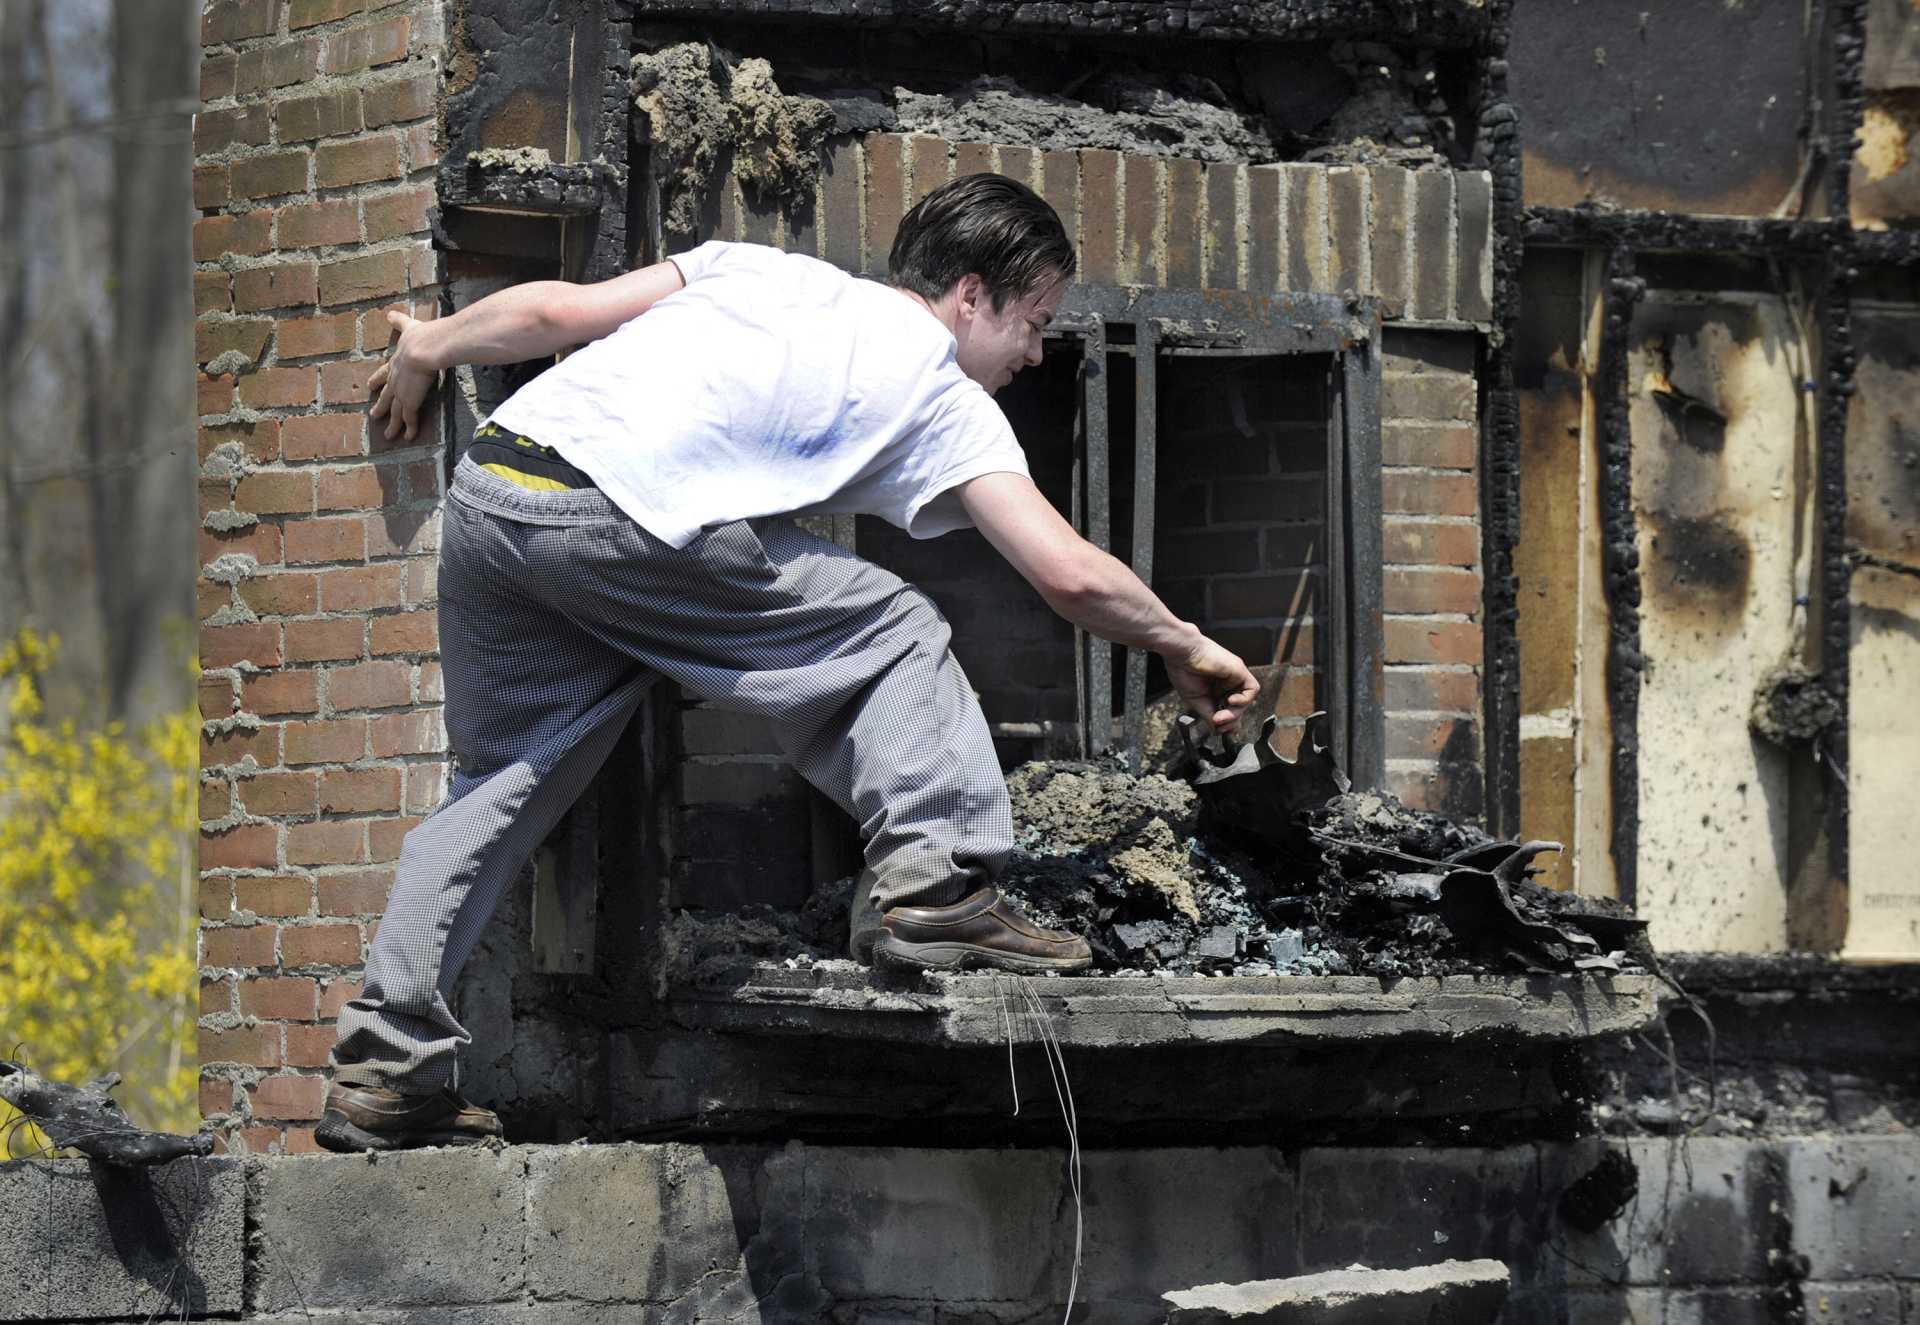 A young man walks through the rubble that is left after an early morning fire destroyed his home.